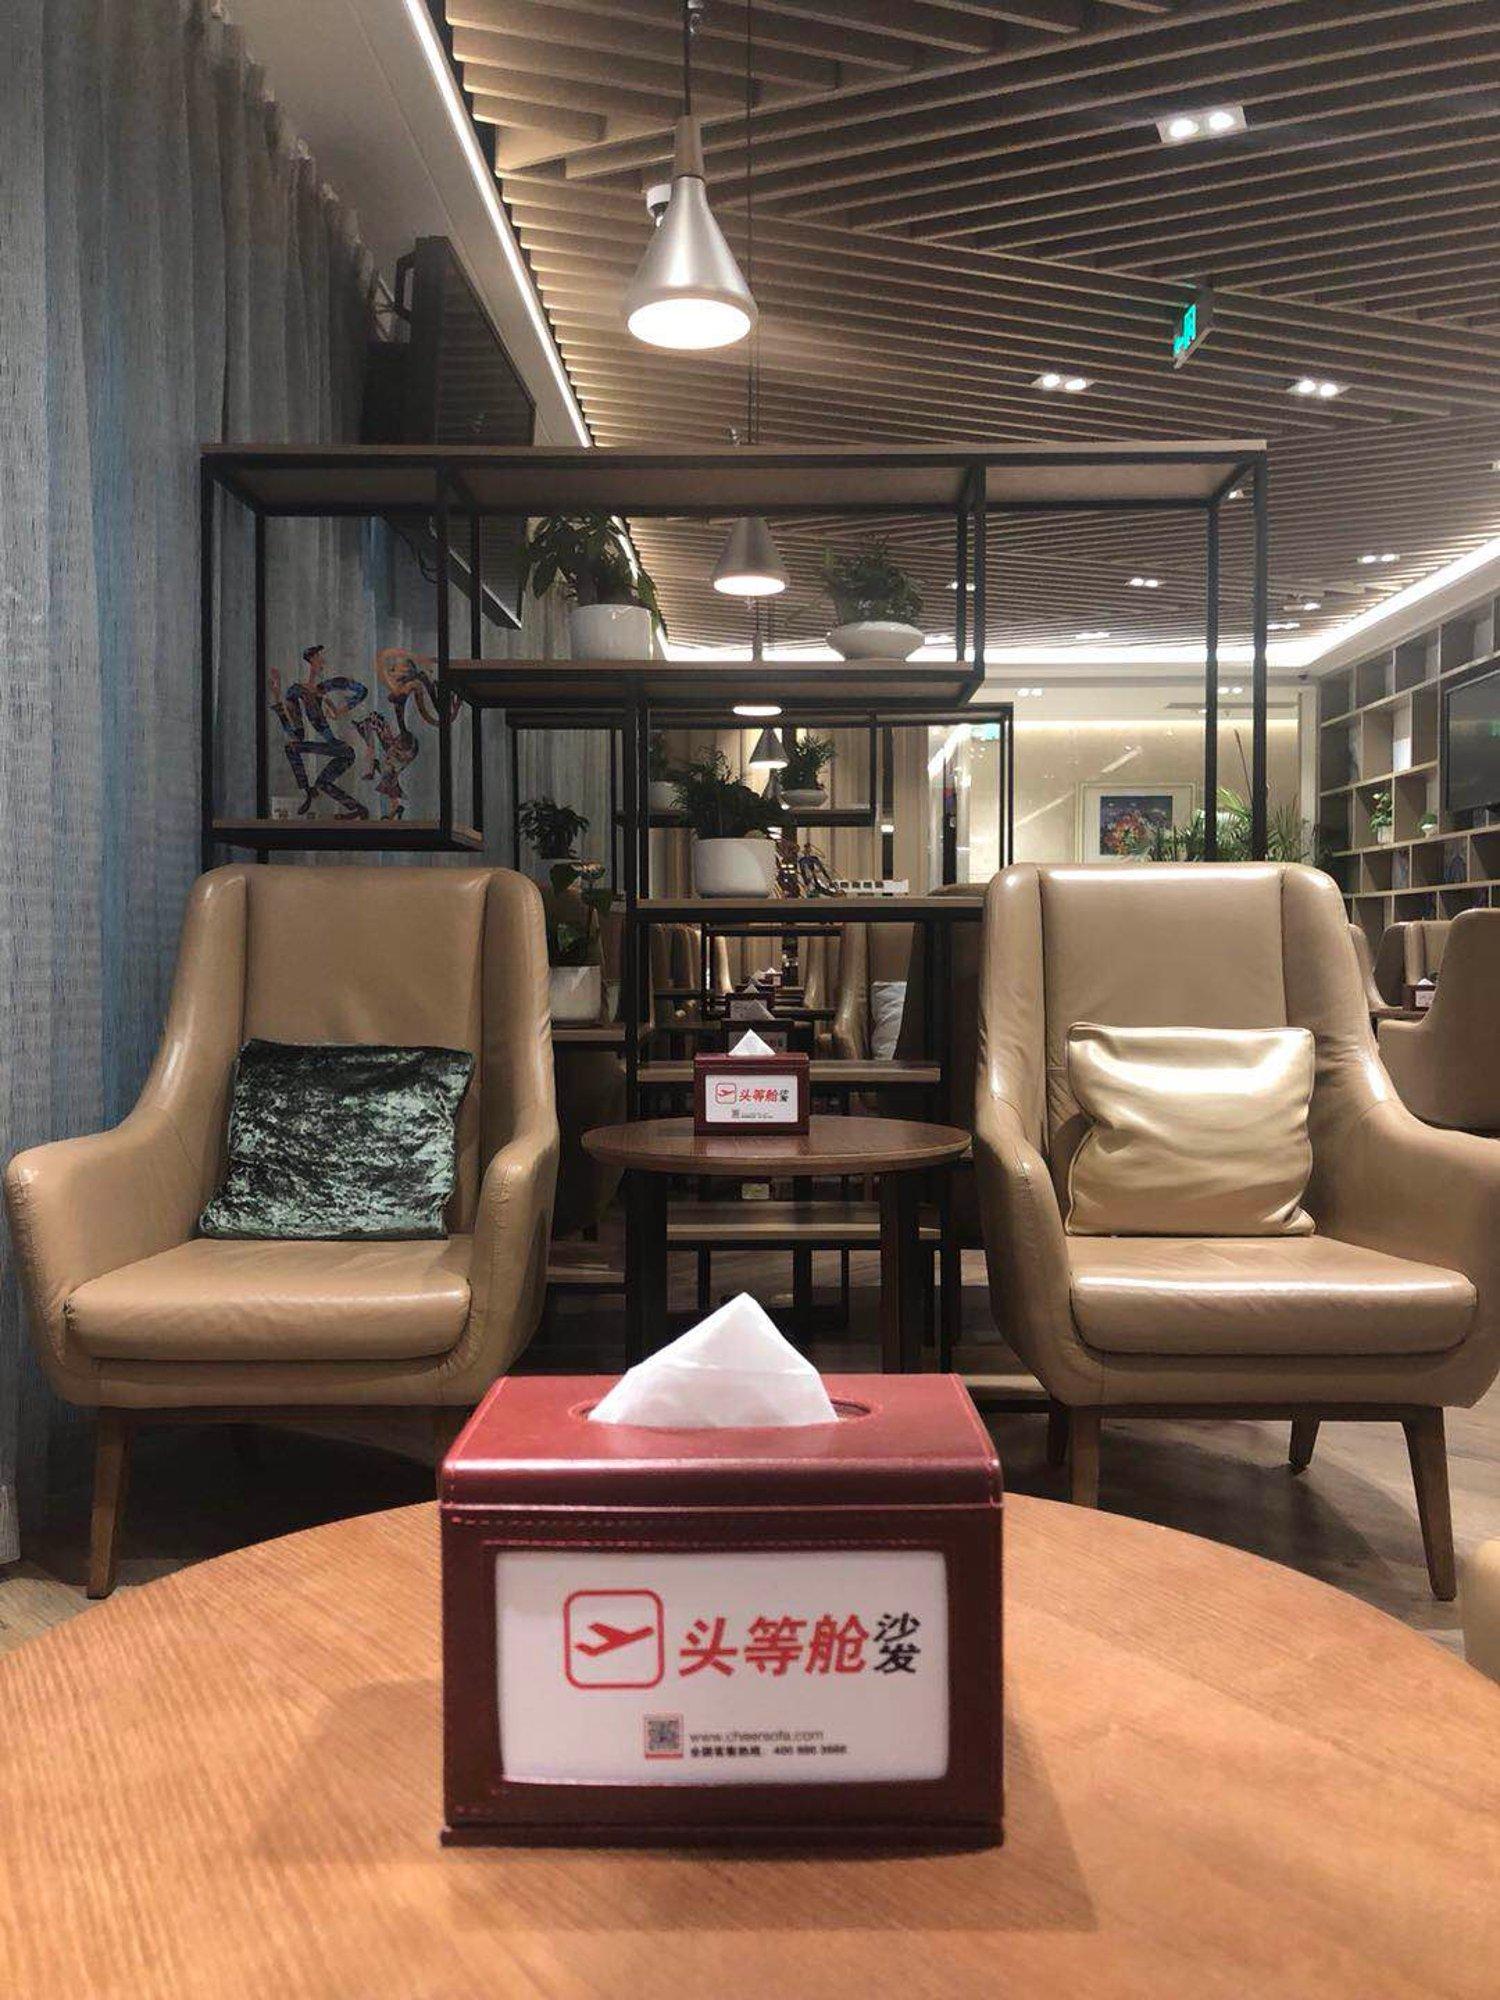 Shenzhen Airport First & Business Class Lounge (Joyee 2) image 8 of 9